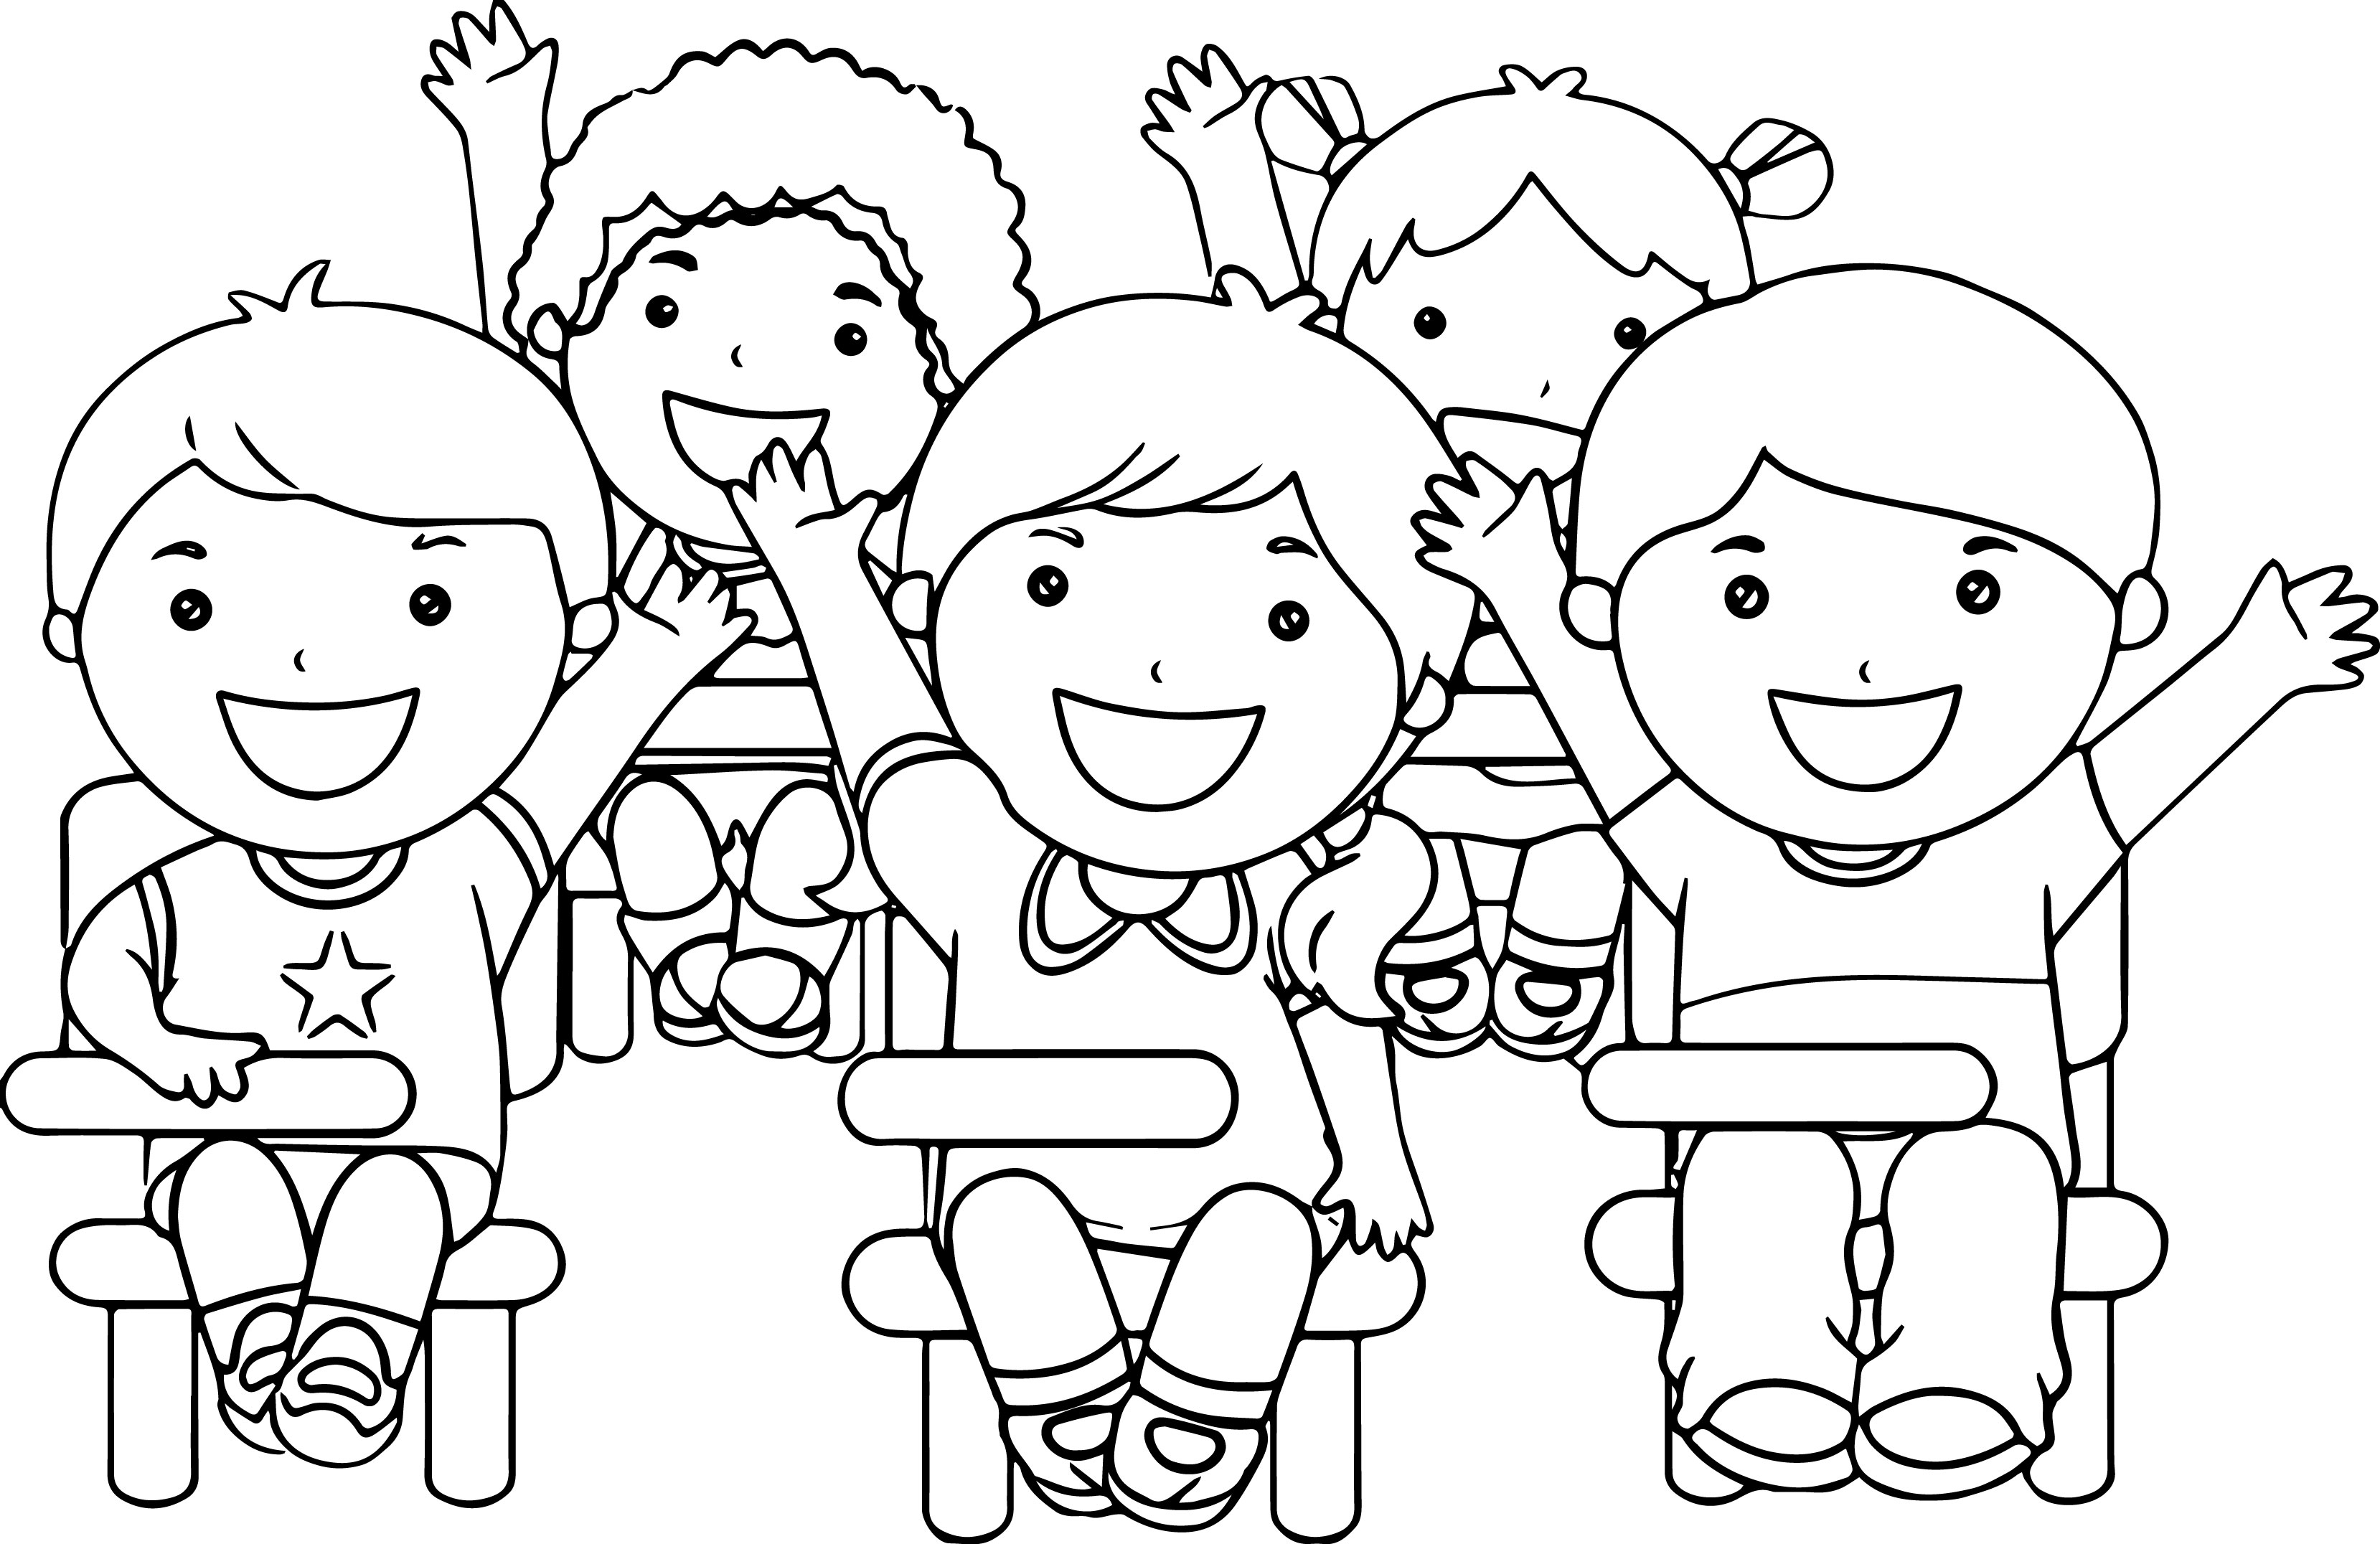 school-age-coloring-pages-at-getcolorings-free-printable-colorings-pages-to-print-and-color